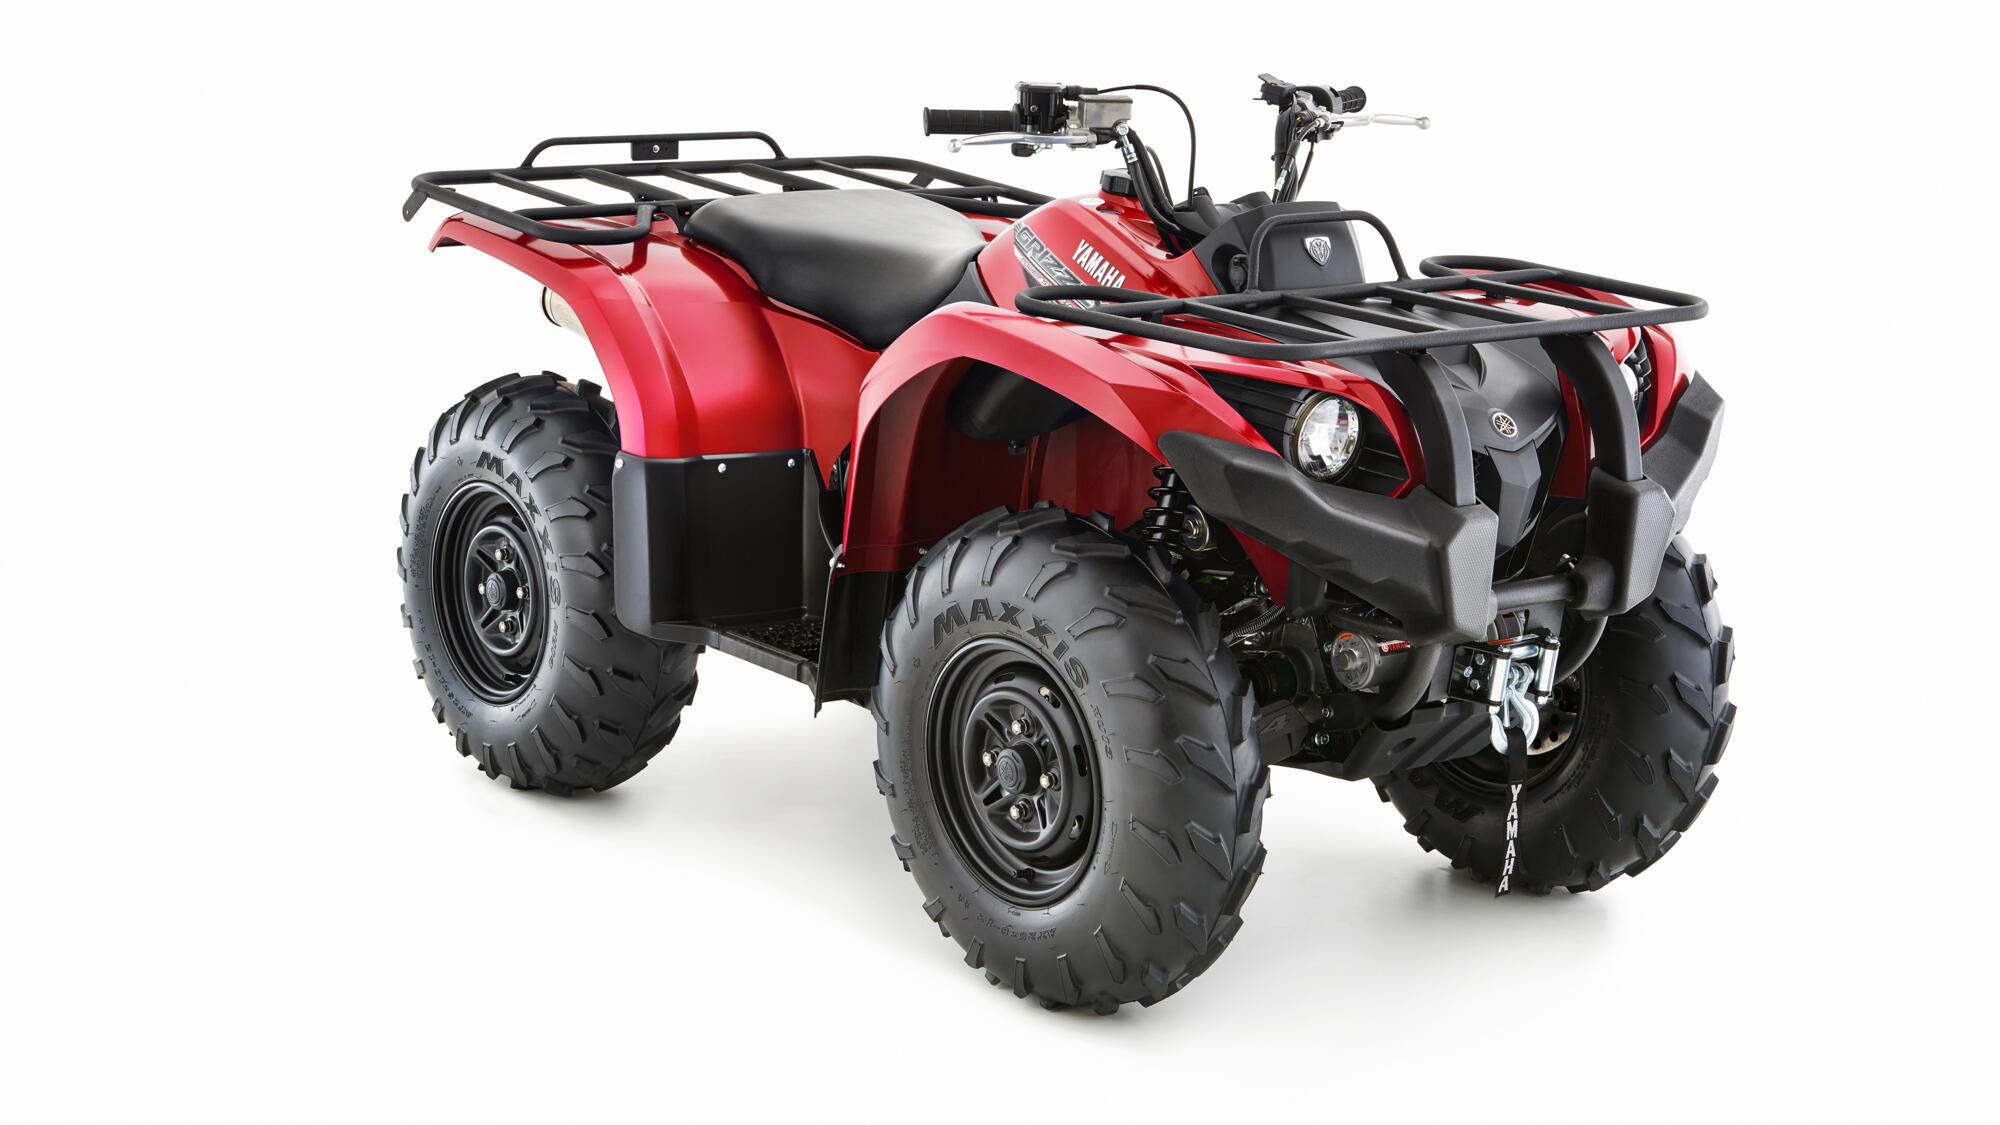 Grizzly 450 EPS